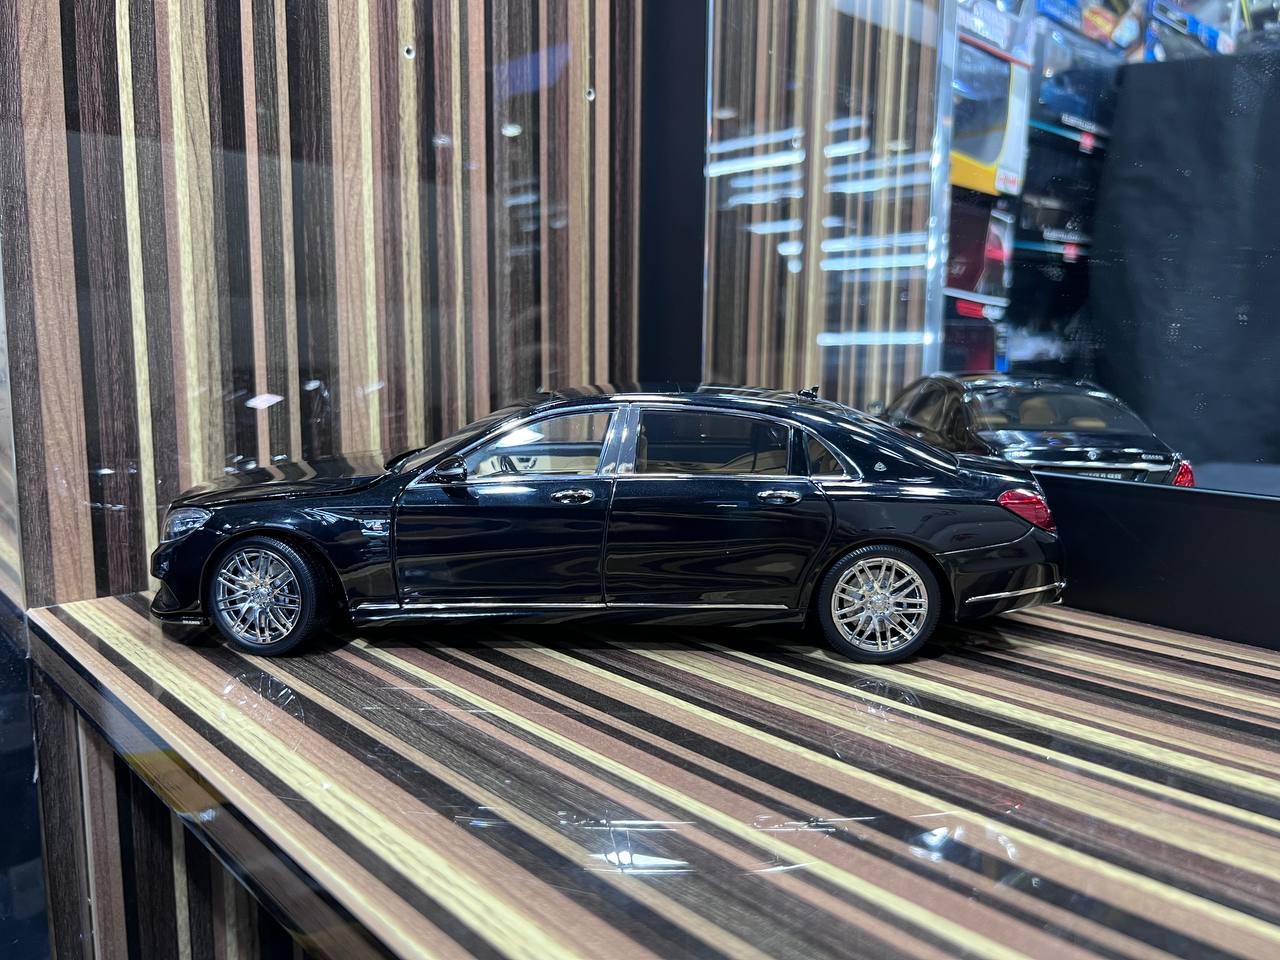 Mercedes-Maybach Brabus 900 S-Class Almost Real